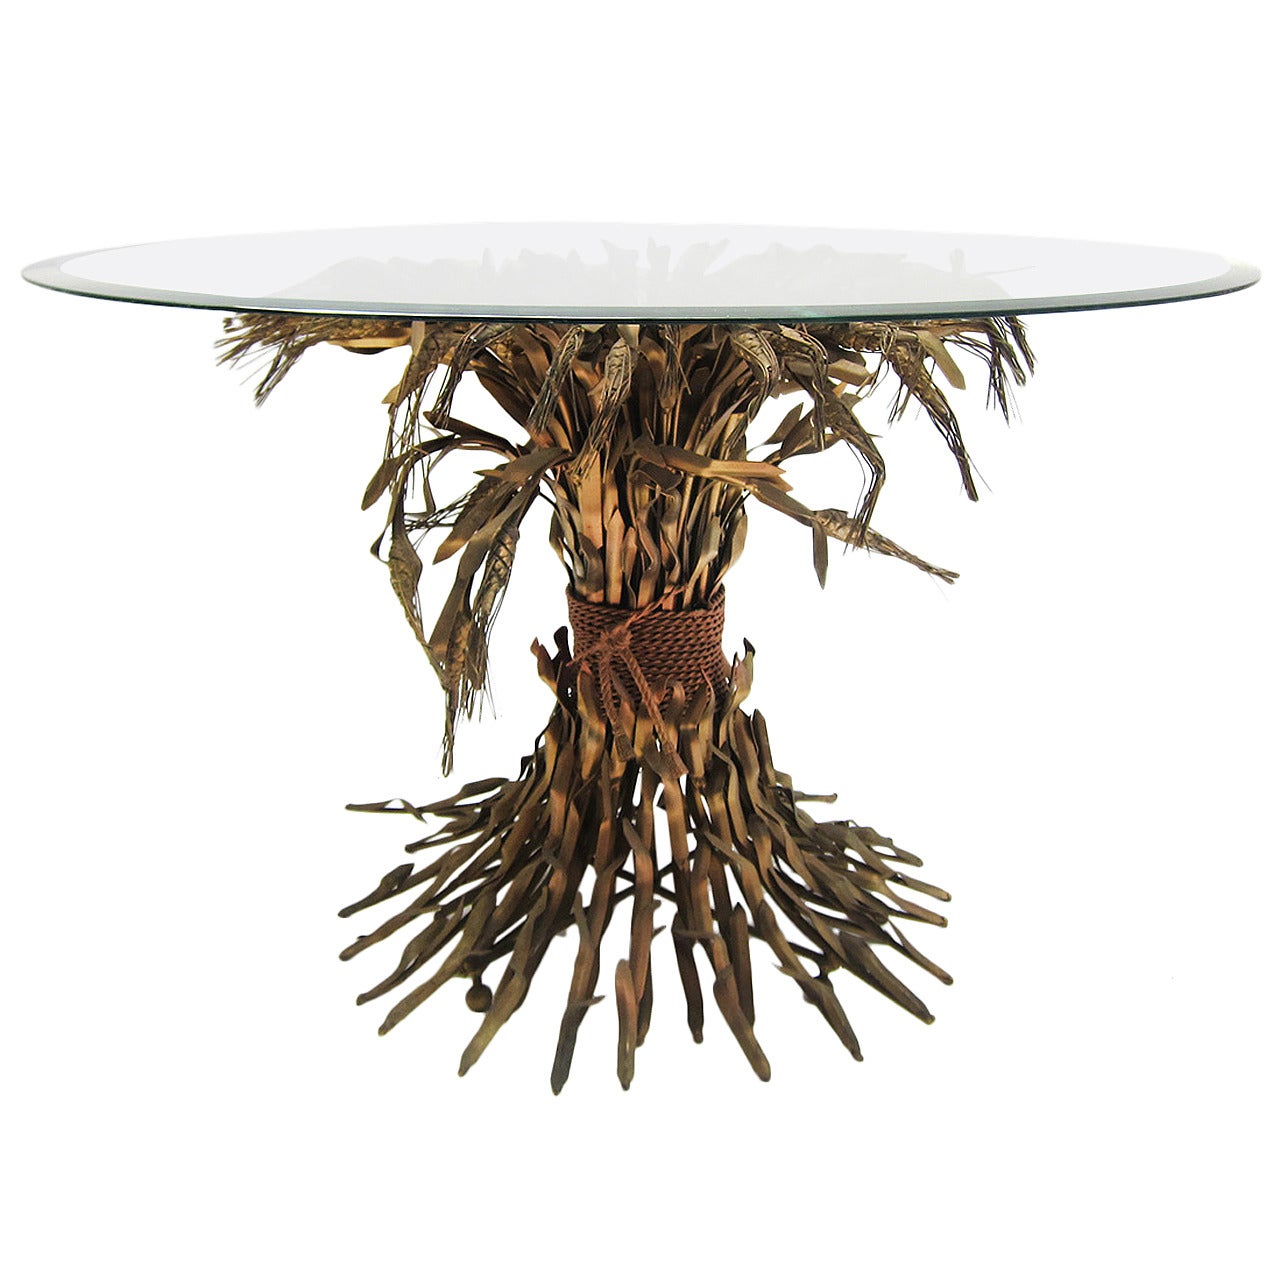 Sheaf of Wheat Center Table by Arturo Pani